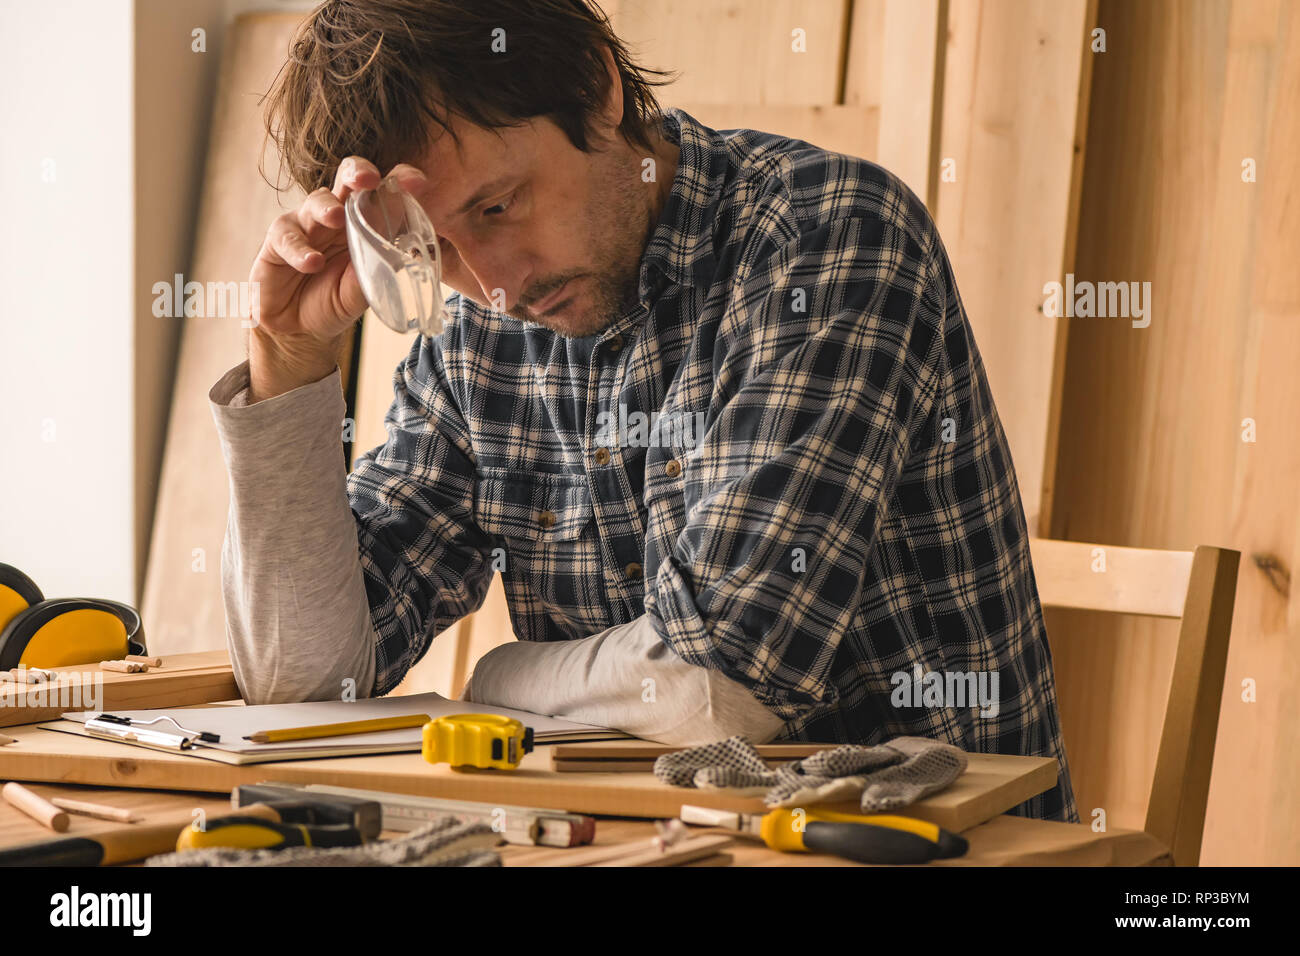 Carpenter planning DIY project in his small business woodwork workshop Stock Photo